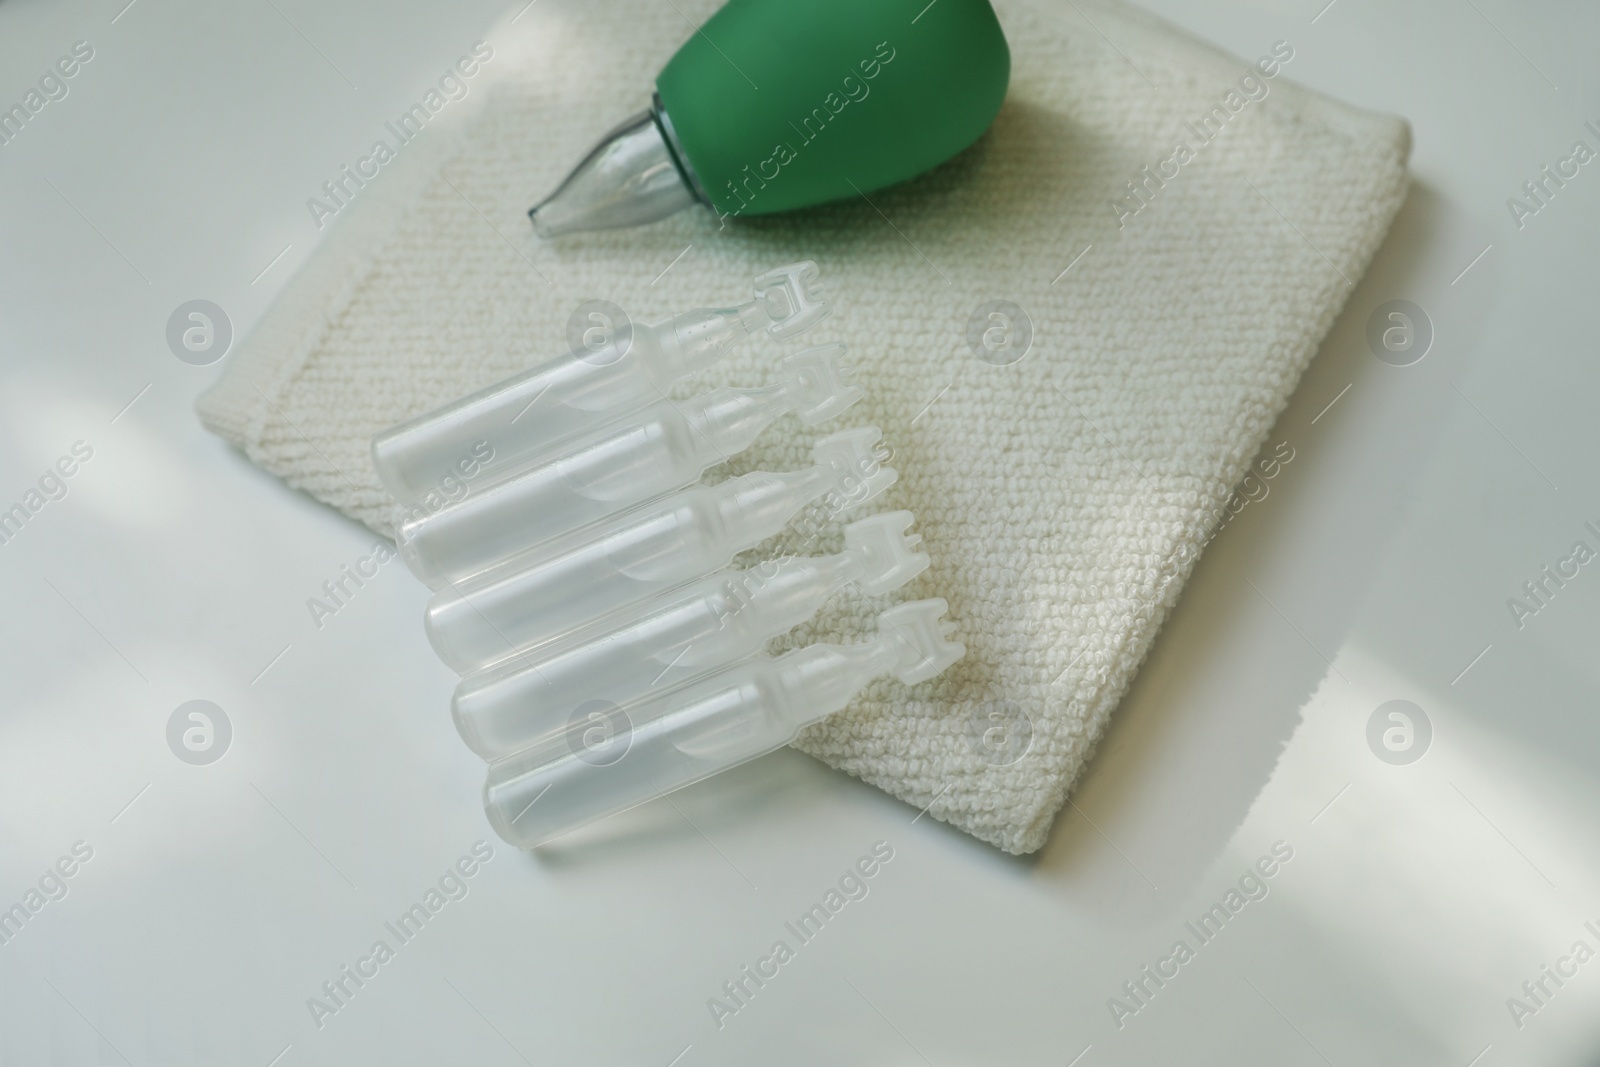 Photo of Single dose ampoules of sterile isotonic sea water solution, towel and nasal aspirator on white table